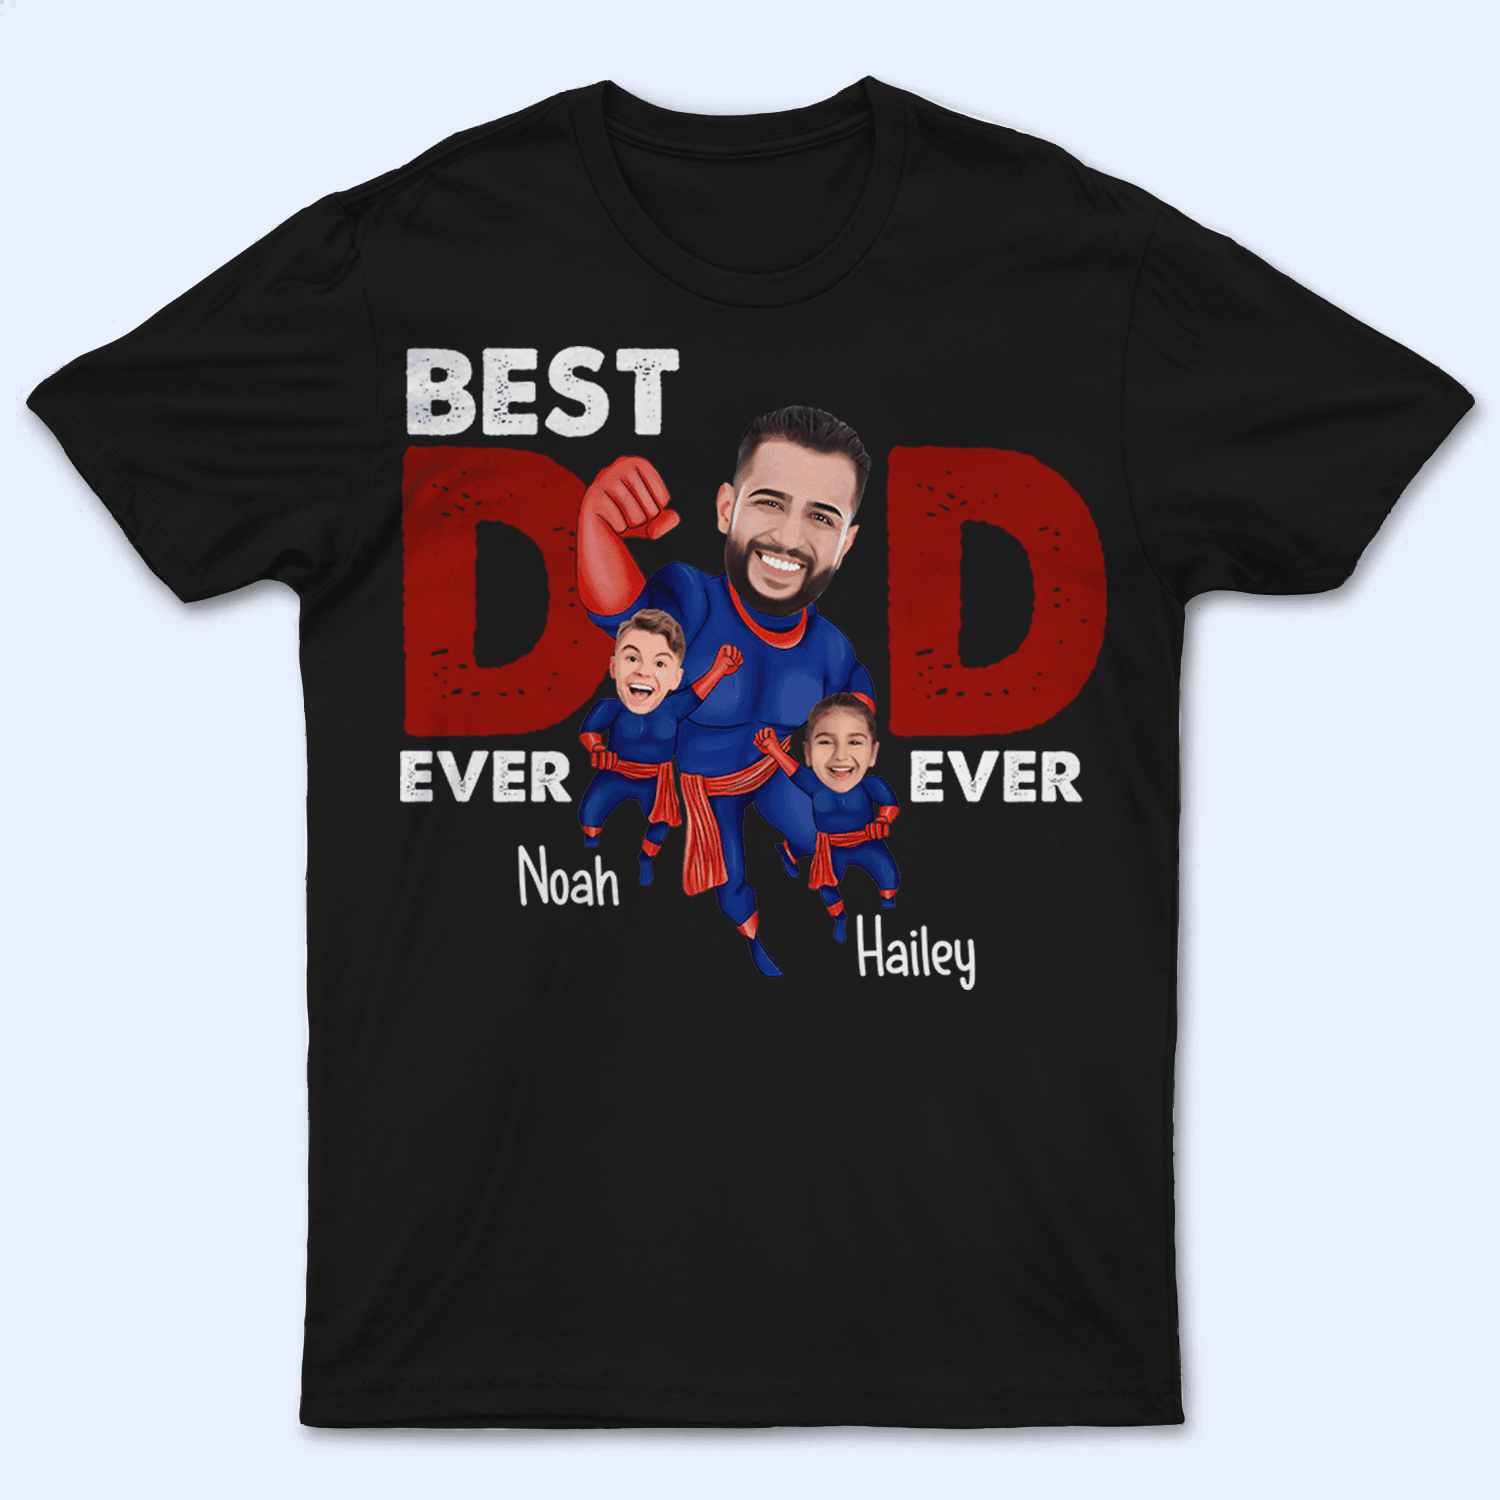 [Photo Inserted] Best Dad Ever Super Hero - Personalized Custom T Shirt - Birthday, Loving, Funny Gift for Grandfather/Dad/Father, Husband, Grandparent - Suzitee Store